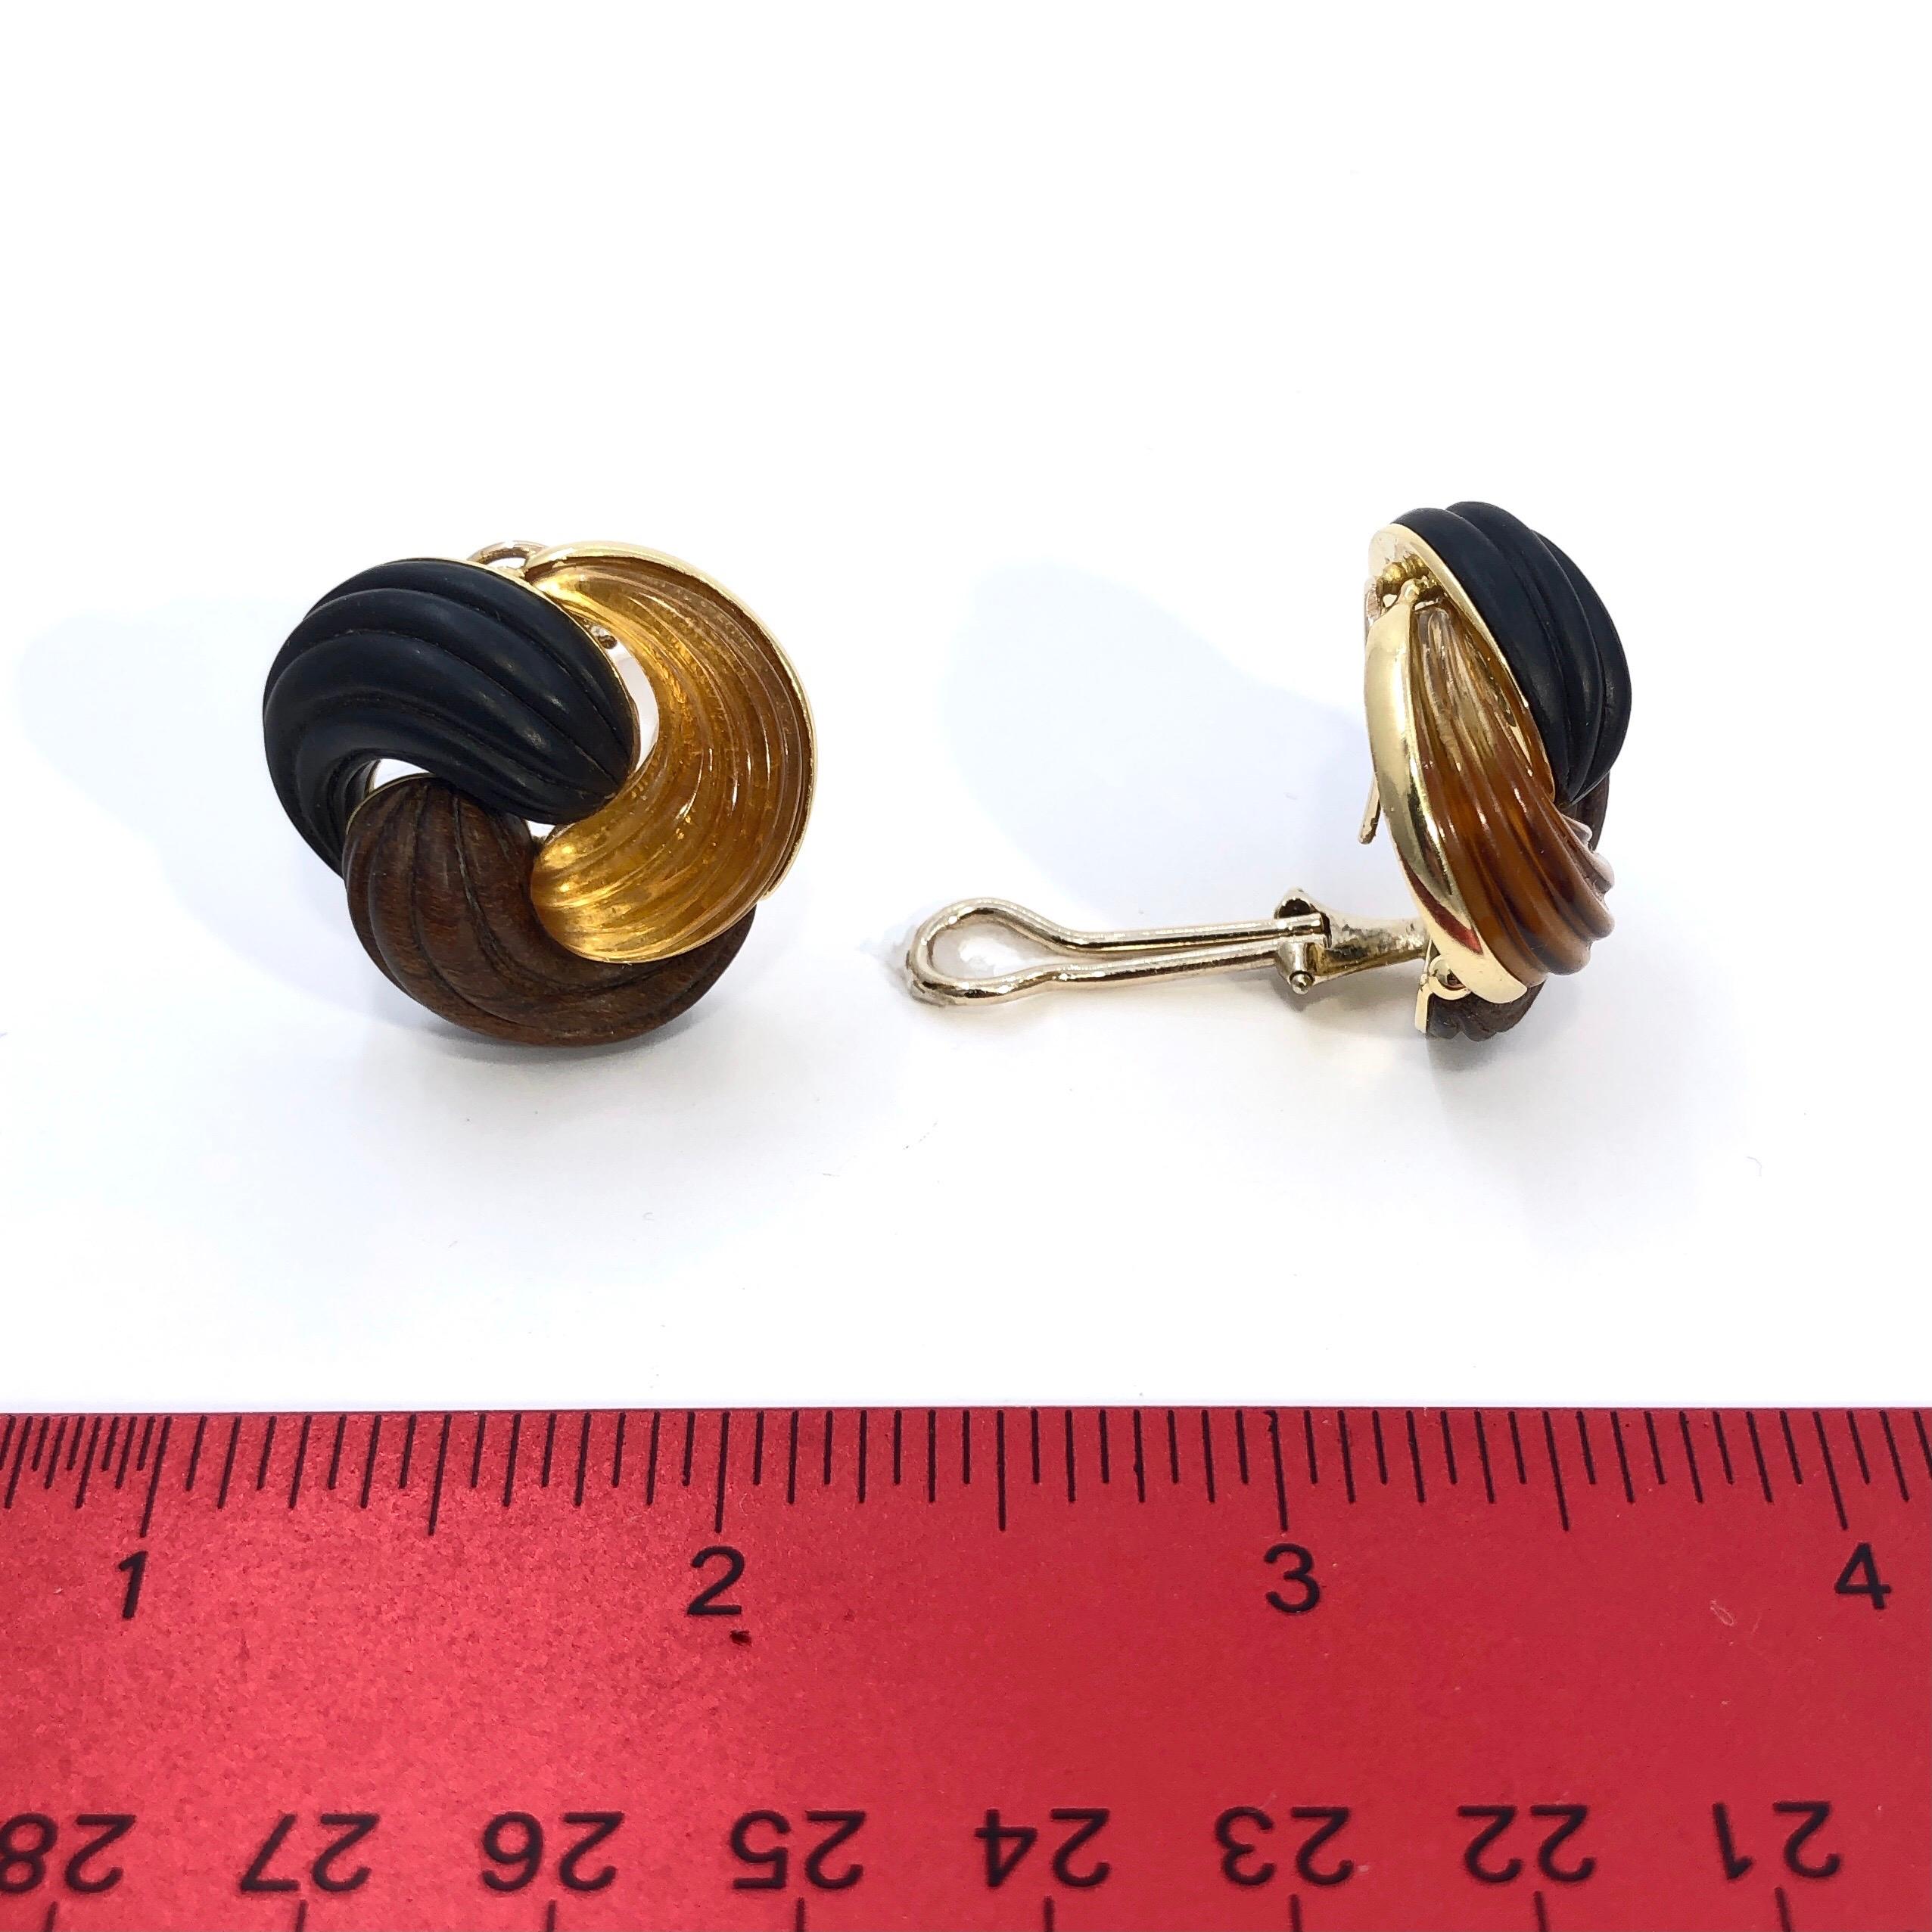 Lovely Italian Autumn Colored Fluted Woods, Amber and Gold Knot Style Earrings 1